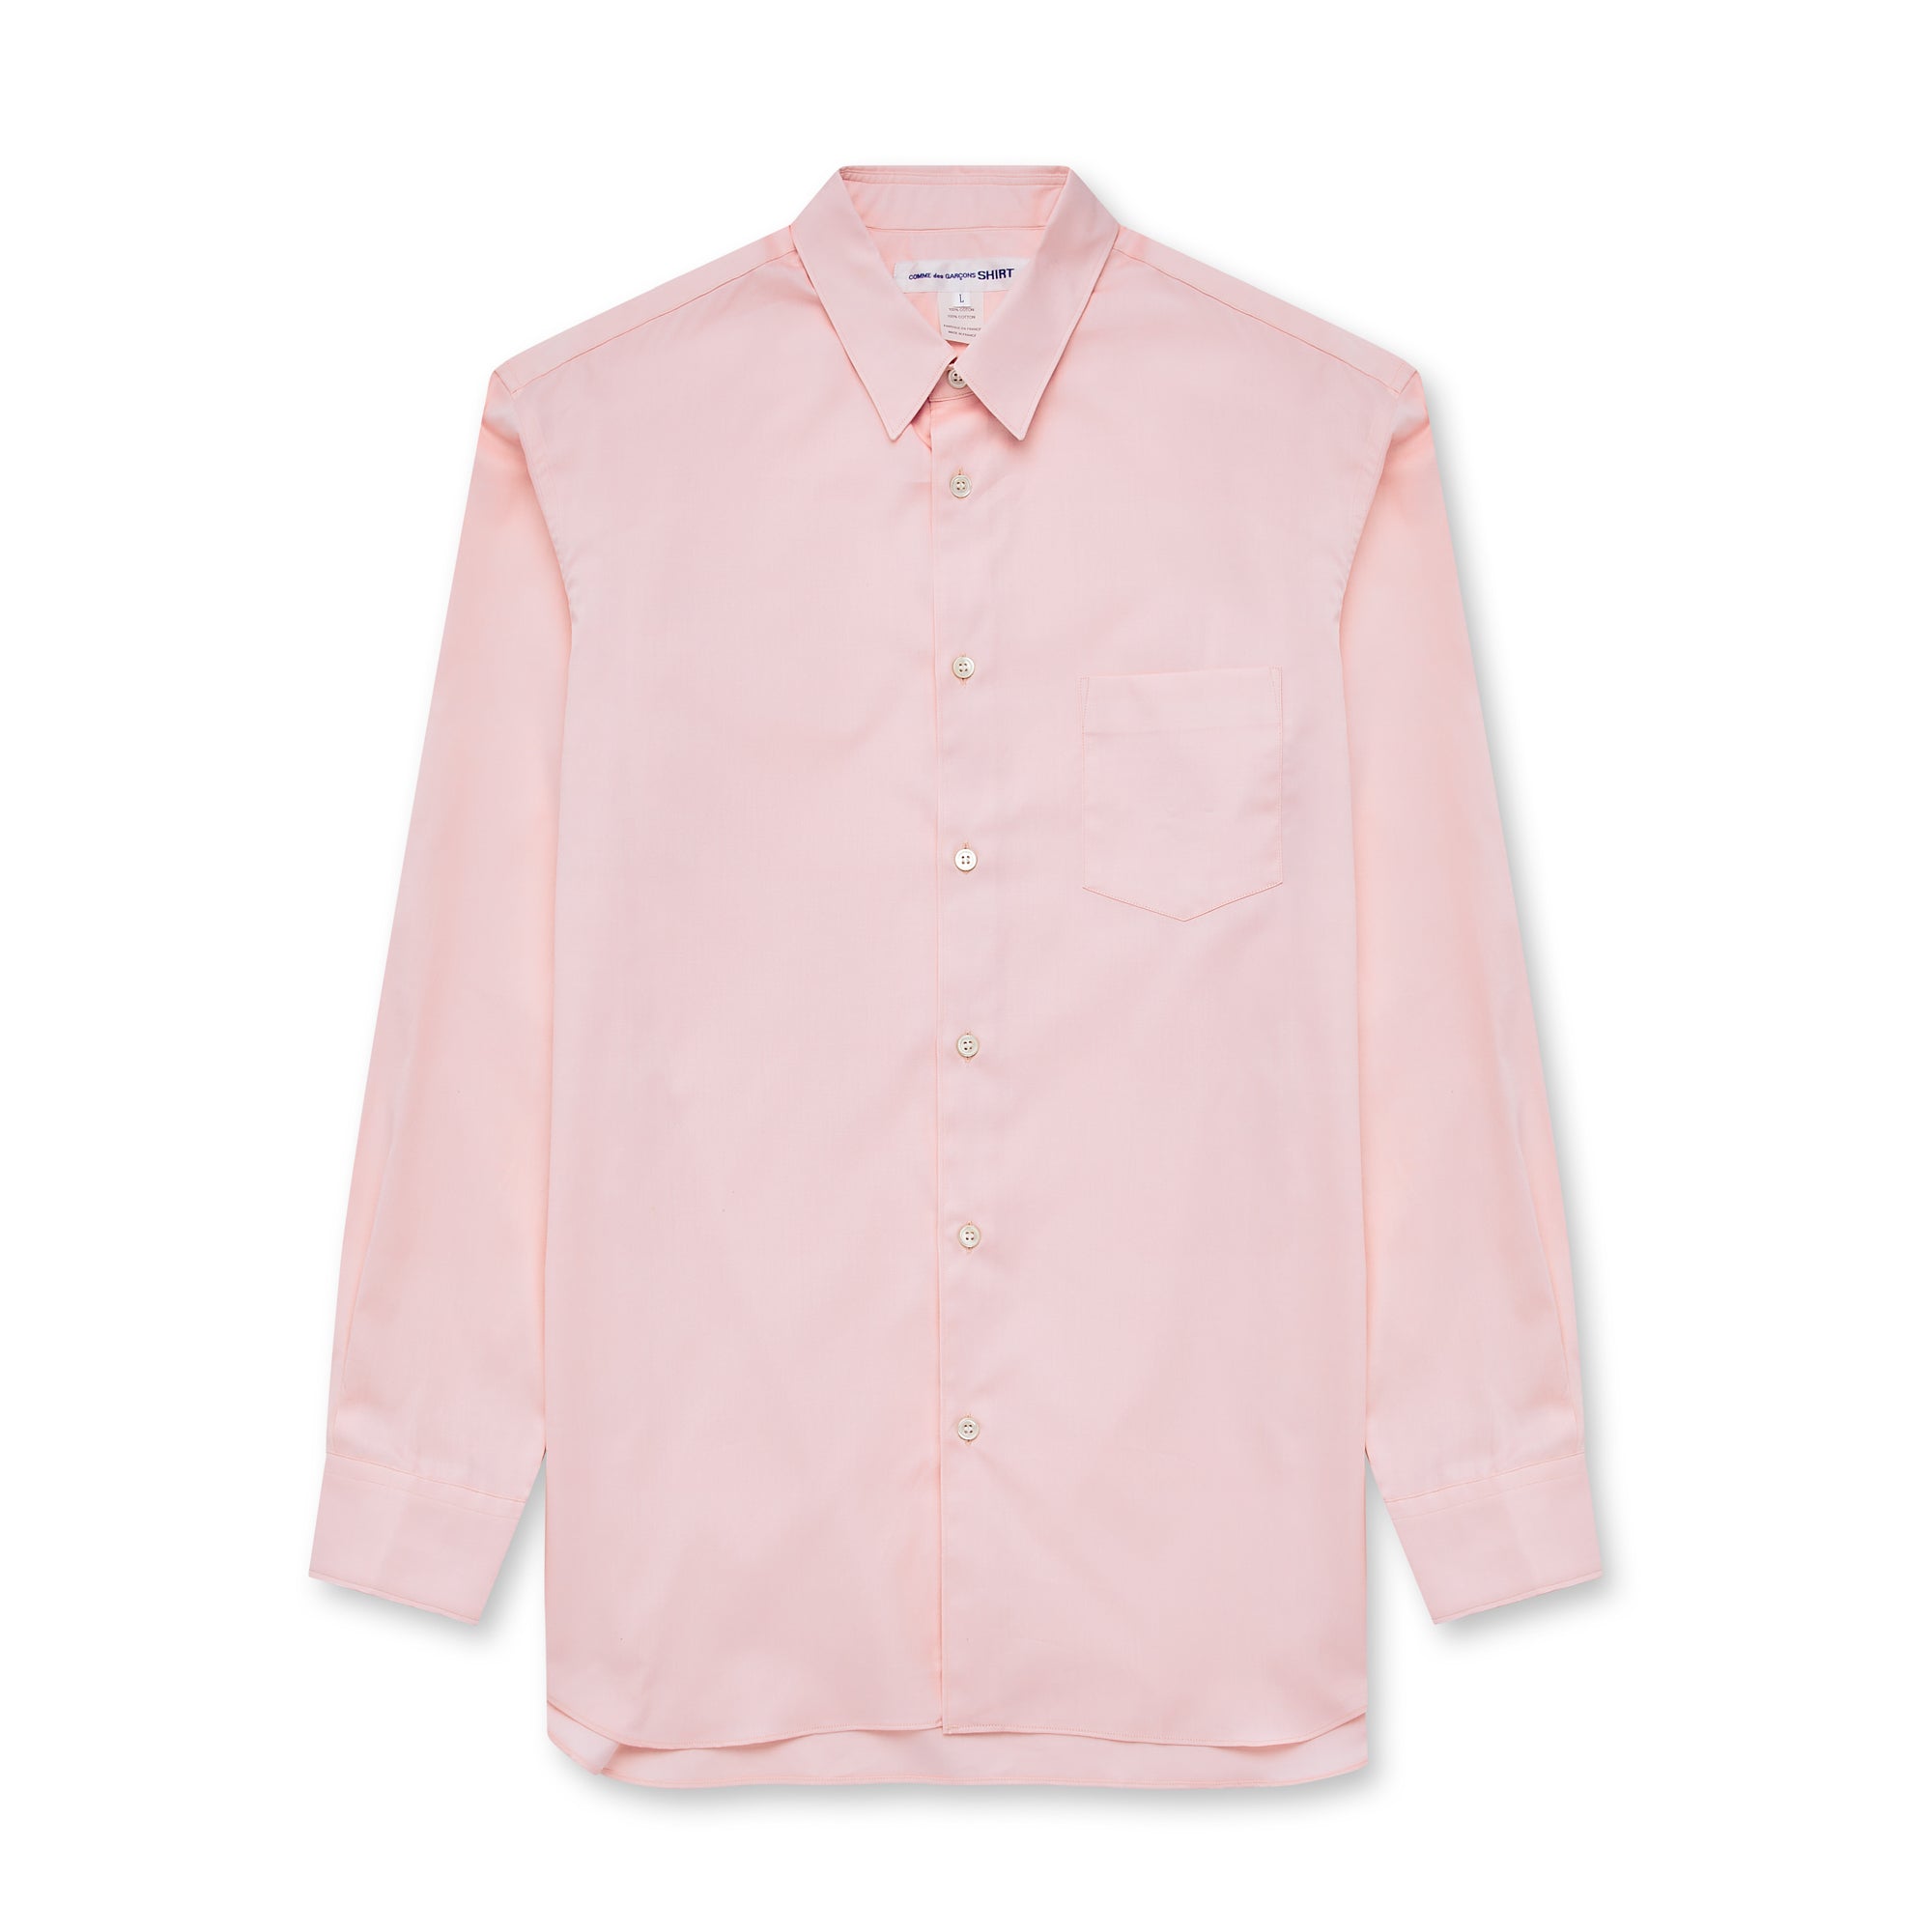 CDG Shirt Forever - Classic Fit Woven Cotton Shirt - (Pink) view 1